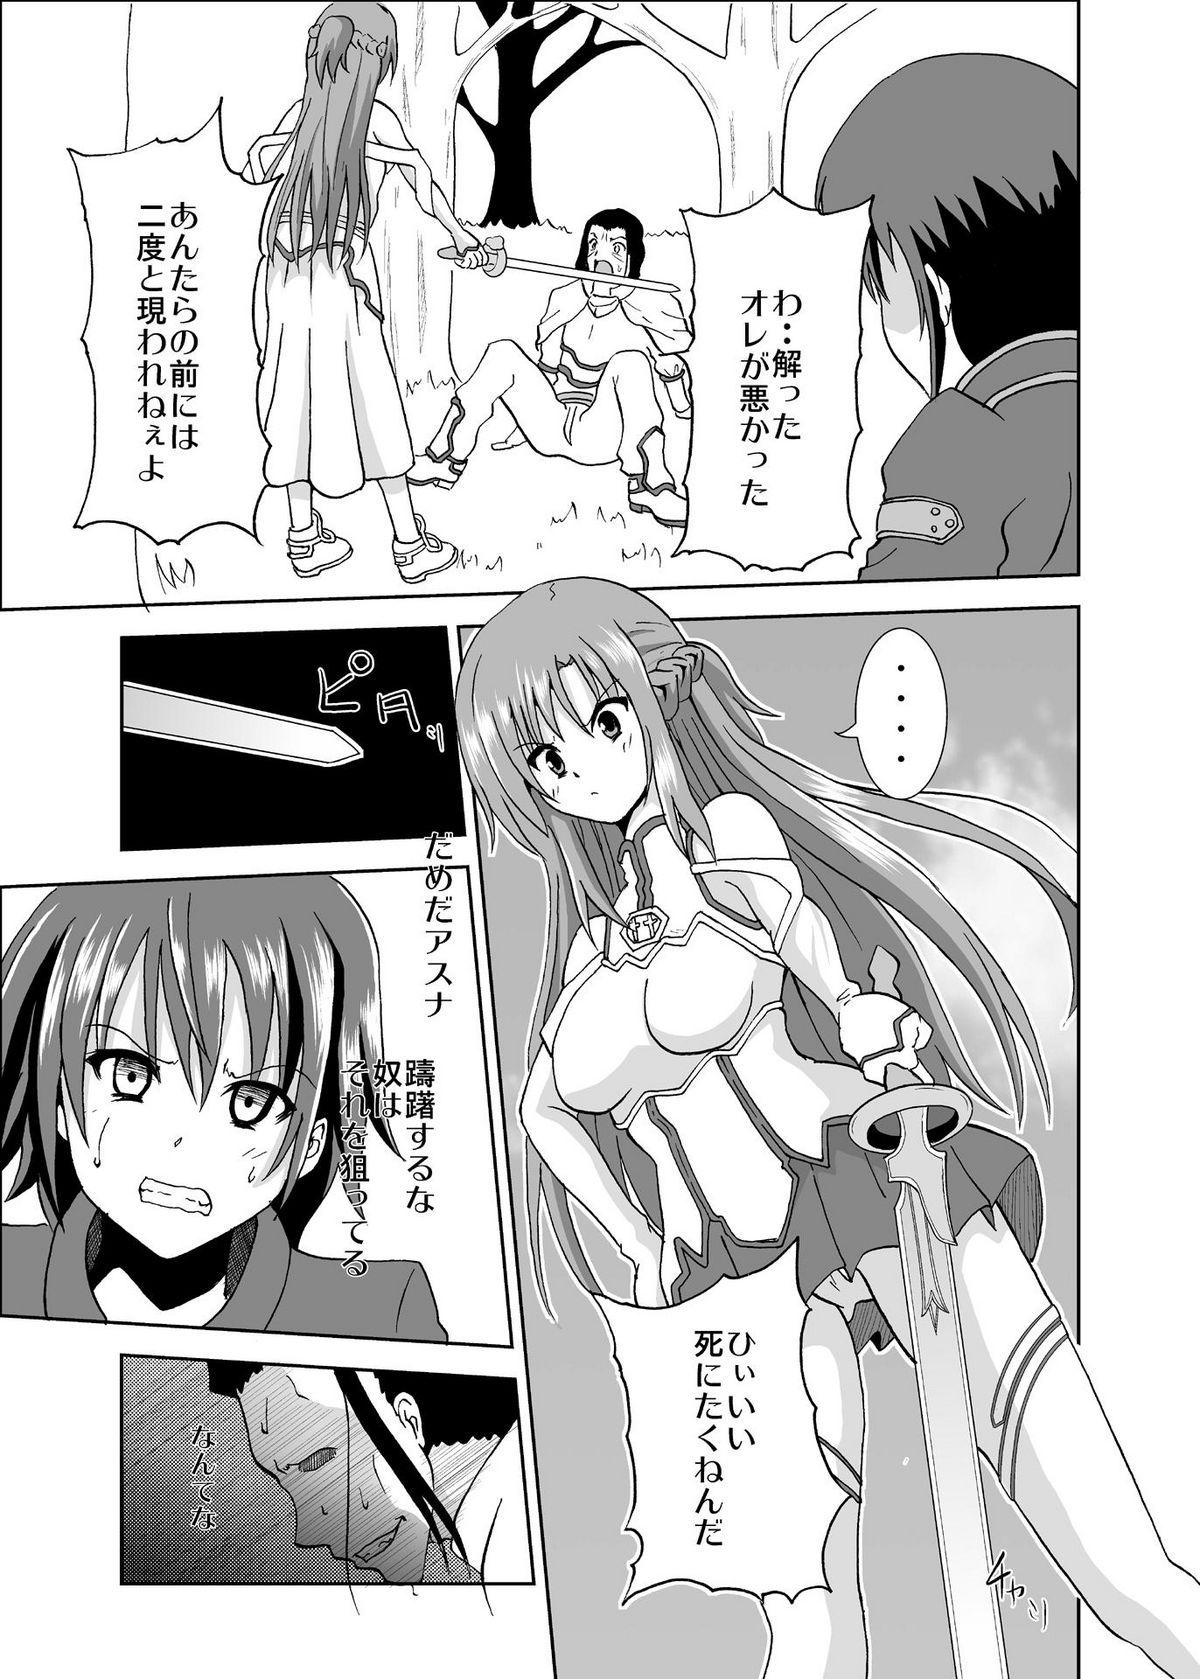 Panties Defeated Heroine A - Sword art online Glamour Porn - Page 4